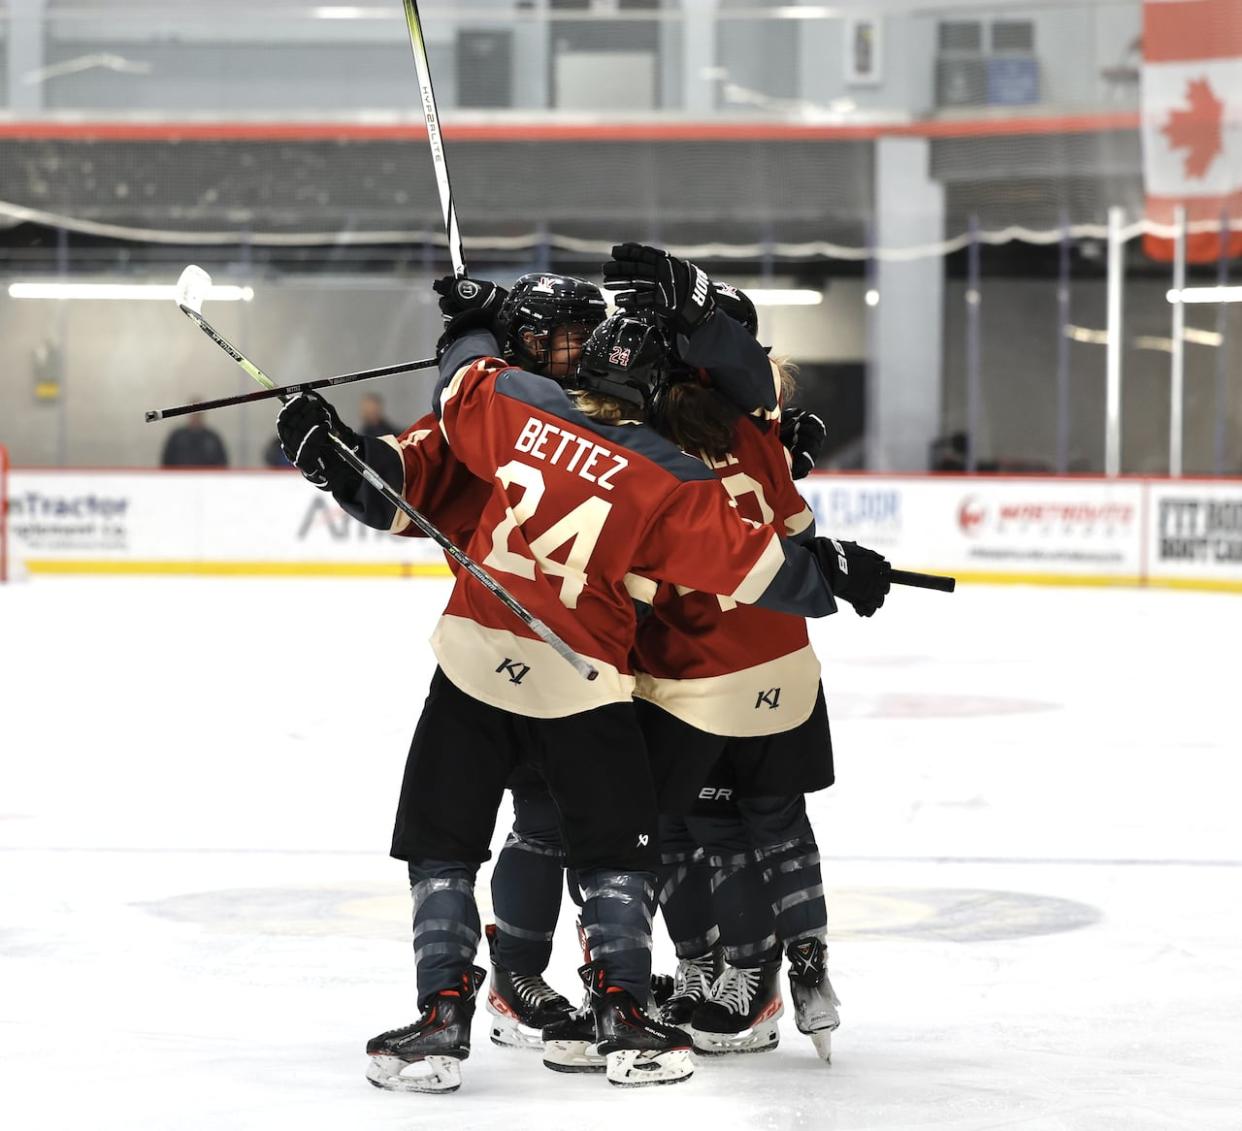 PWHL Montreal players celebrate on the ice during a game against Minnesota in Utica, N.Y., on Thursday. (Heather Pollock/PWHL - image credit)